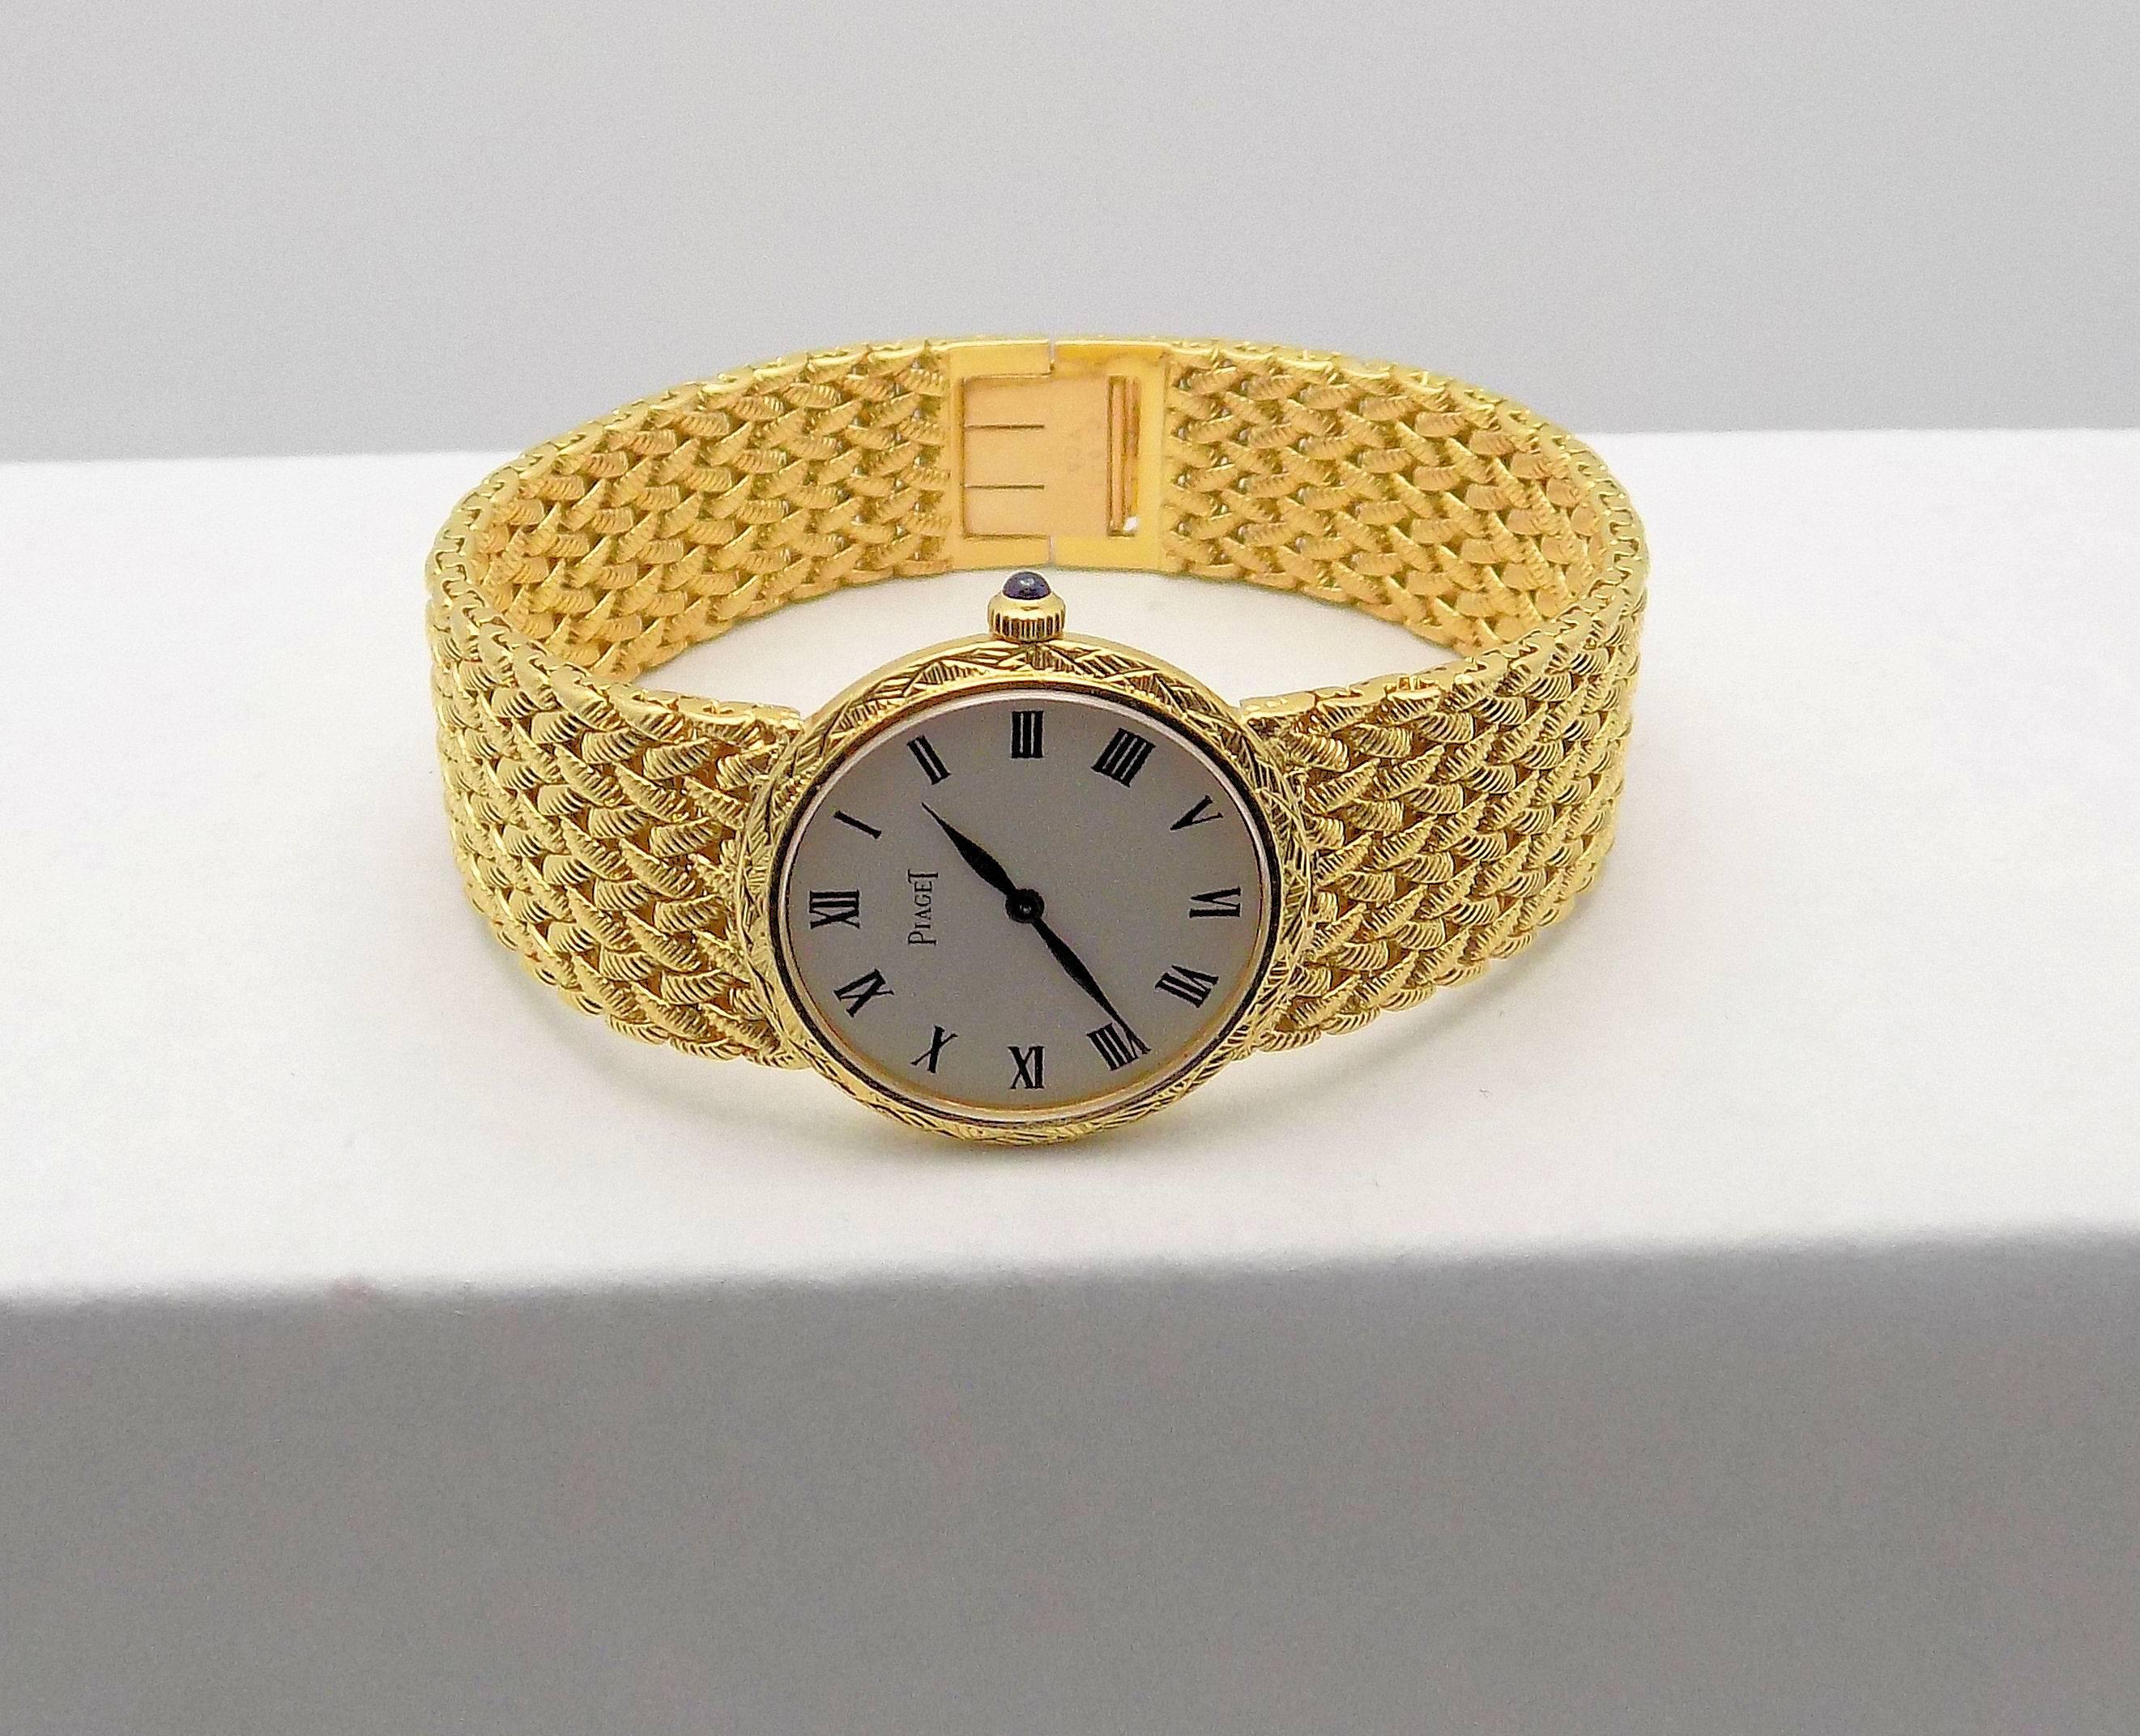 Gold Piaget Wrist Watch In Excellent Condition For Sale In Dallas, TX